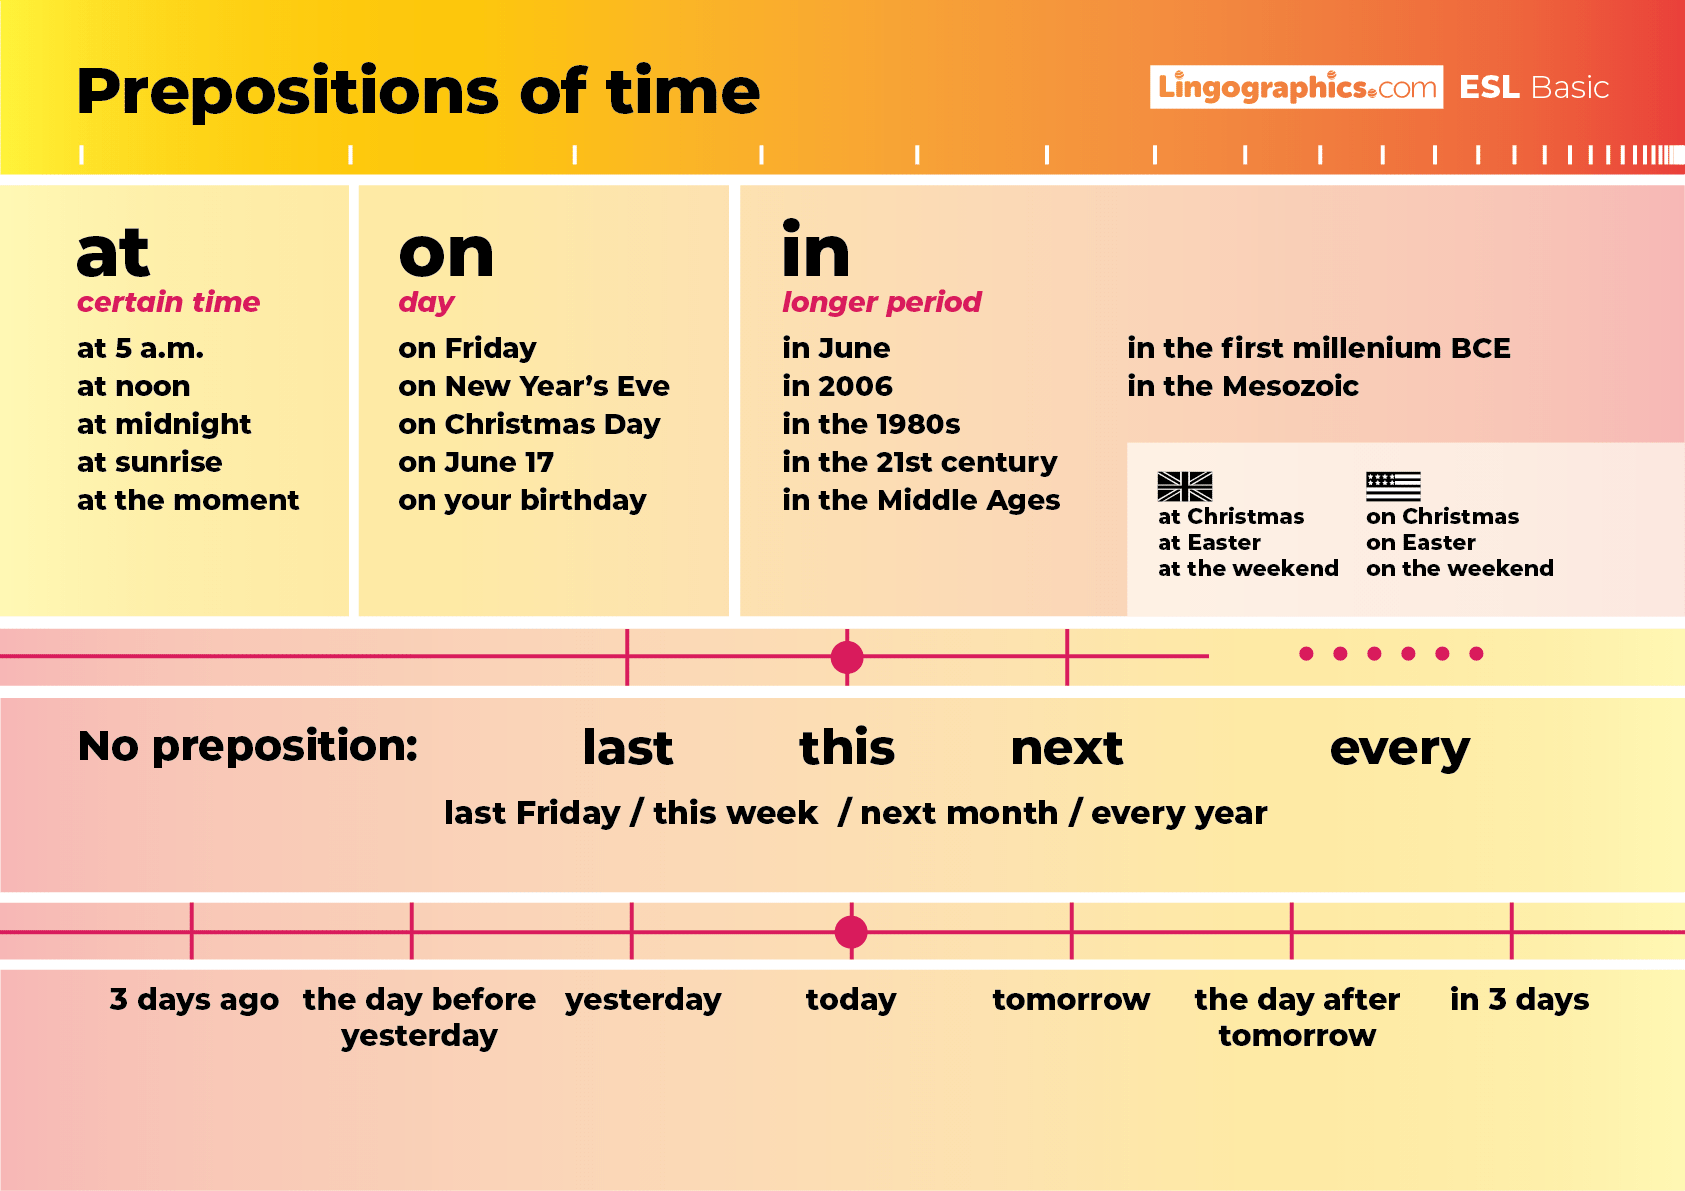 English - prepositions of time